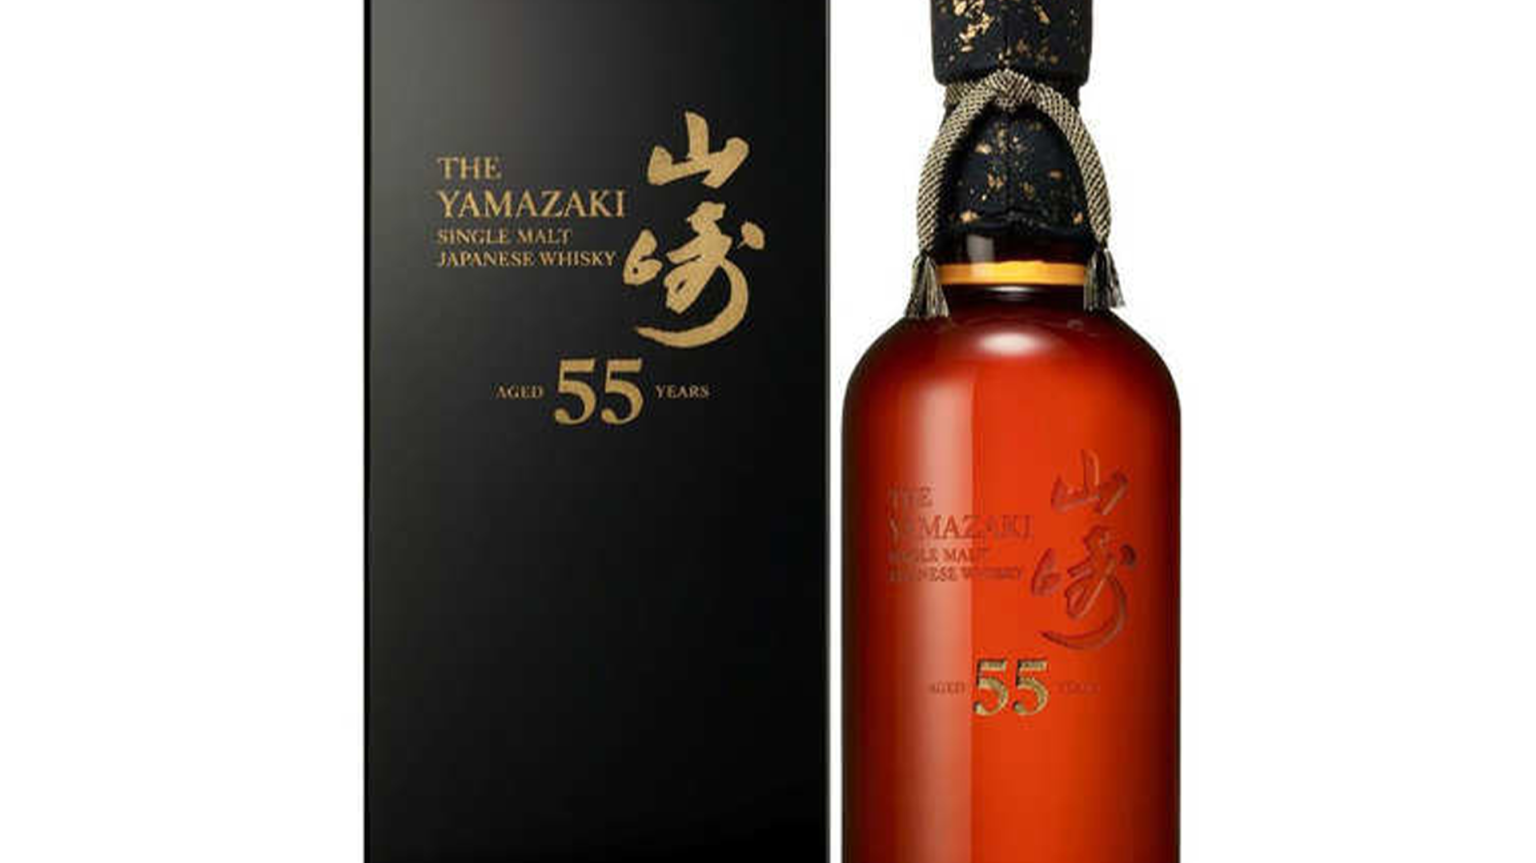 Exploring the limited release of Yamazaki 55 Year Old